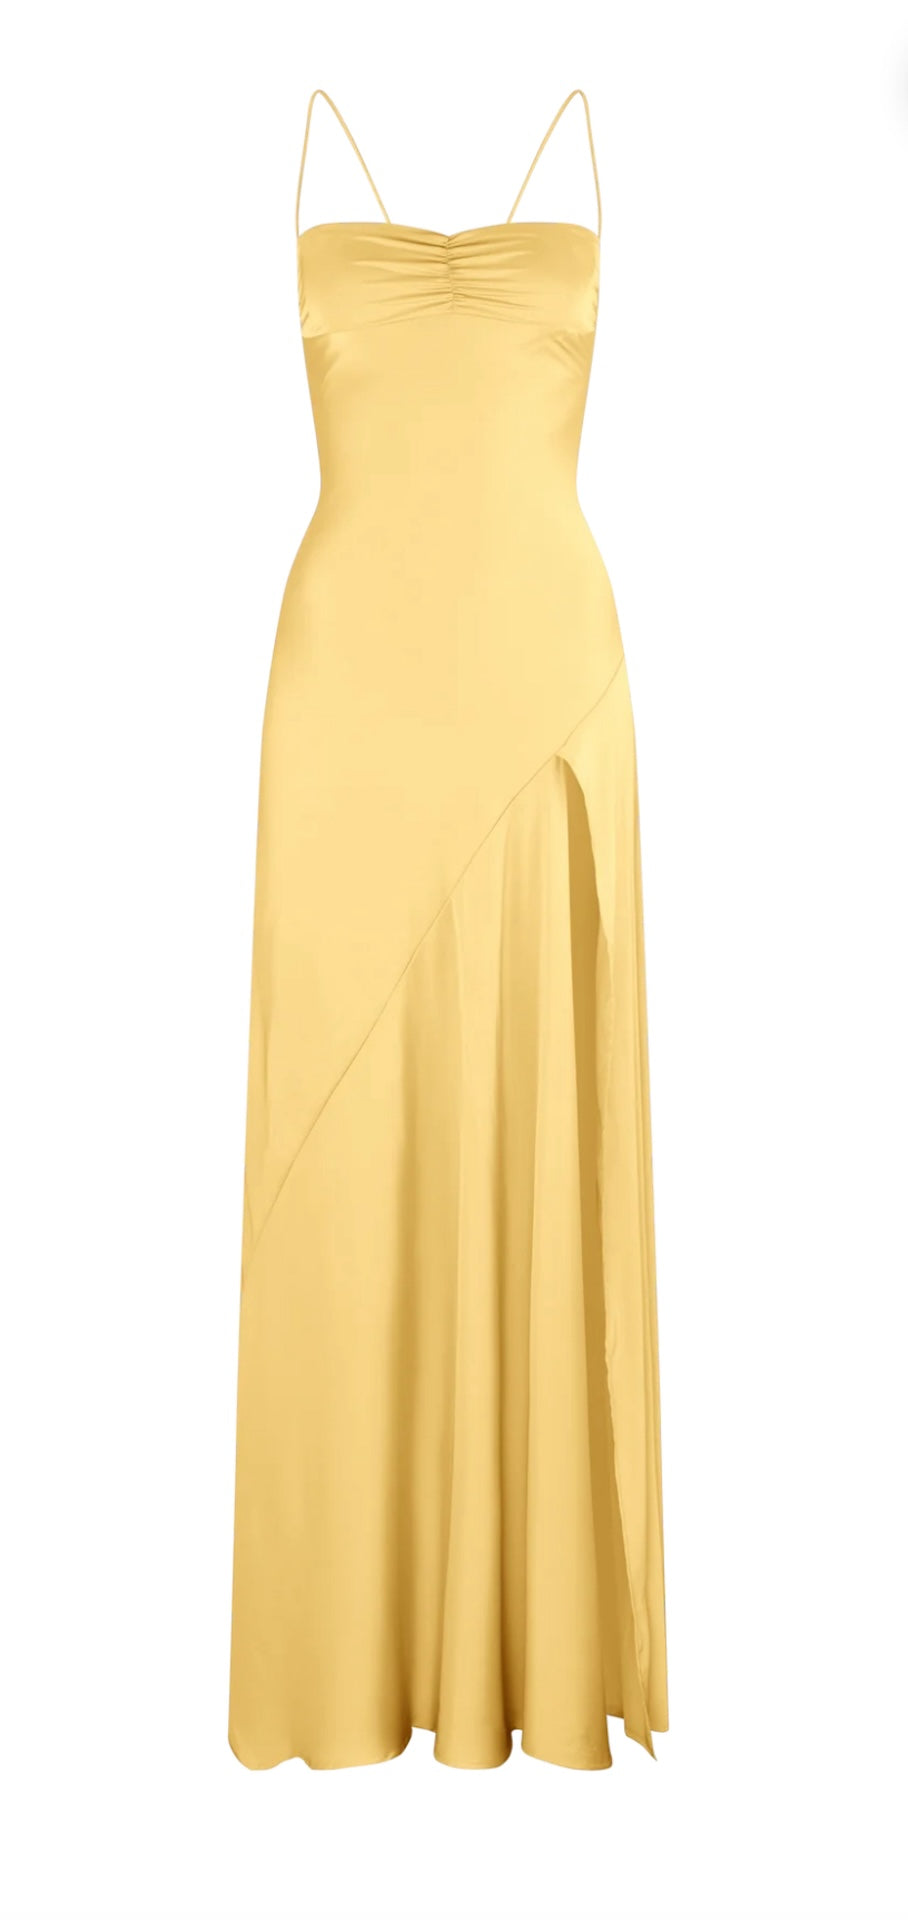 Hntr the Label Gaia Gown Sun yellow dress front view on plain white background.